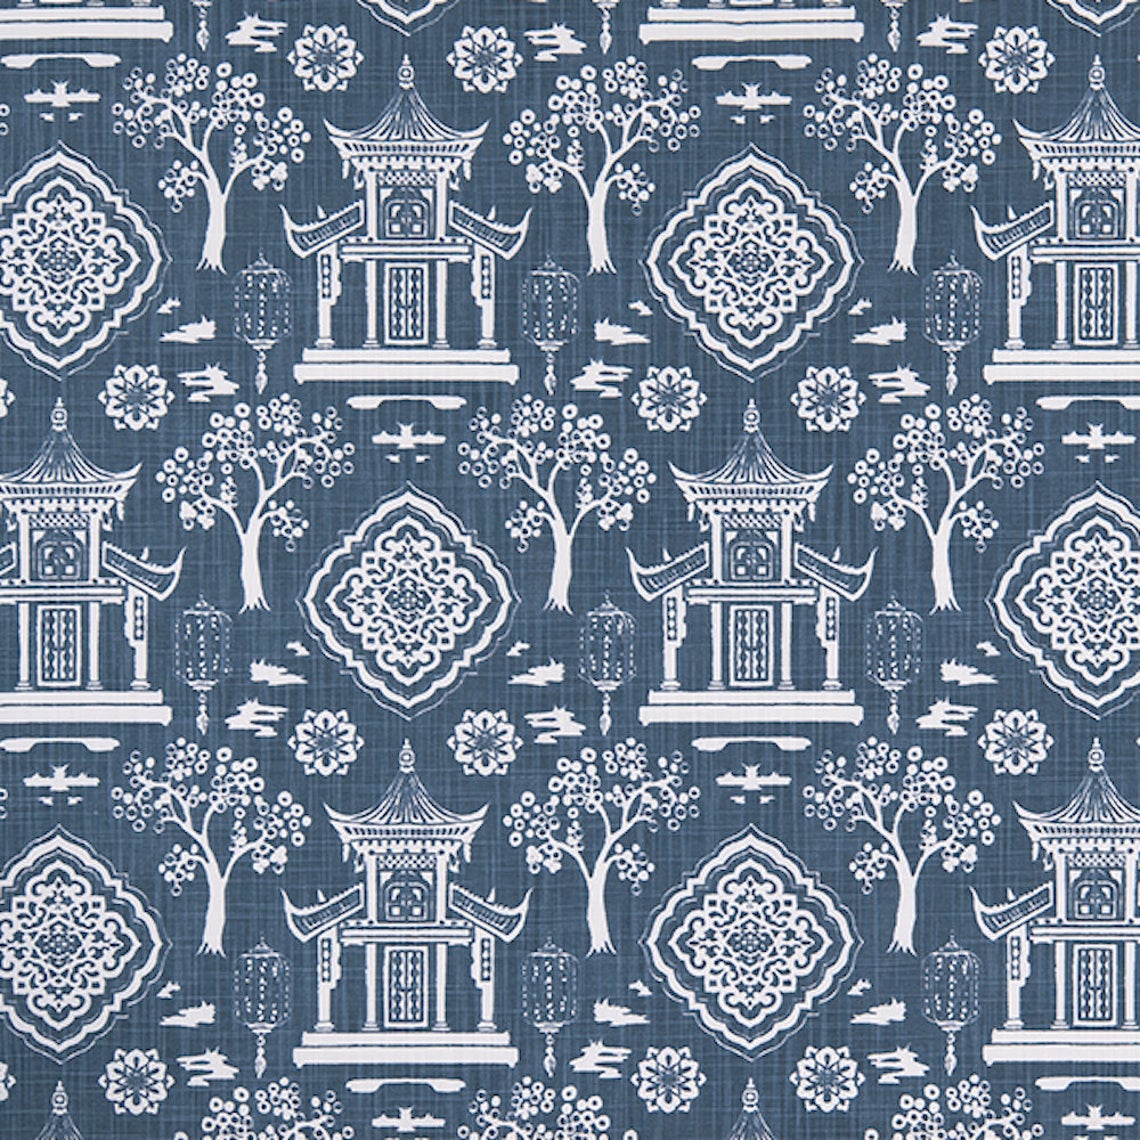 tailored tier cafe curtain panels pair in spirit regal navy blue oriental toile